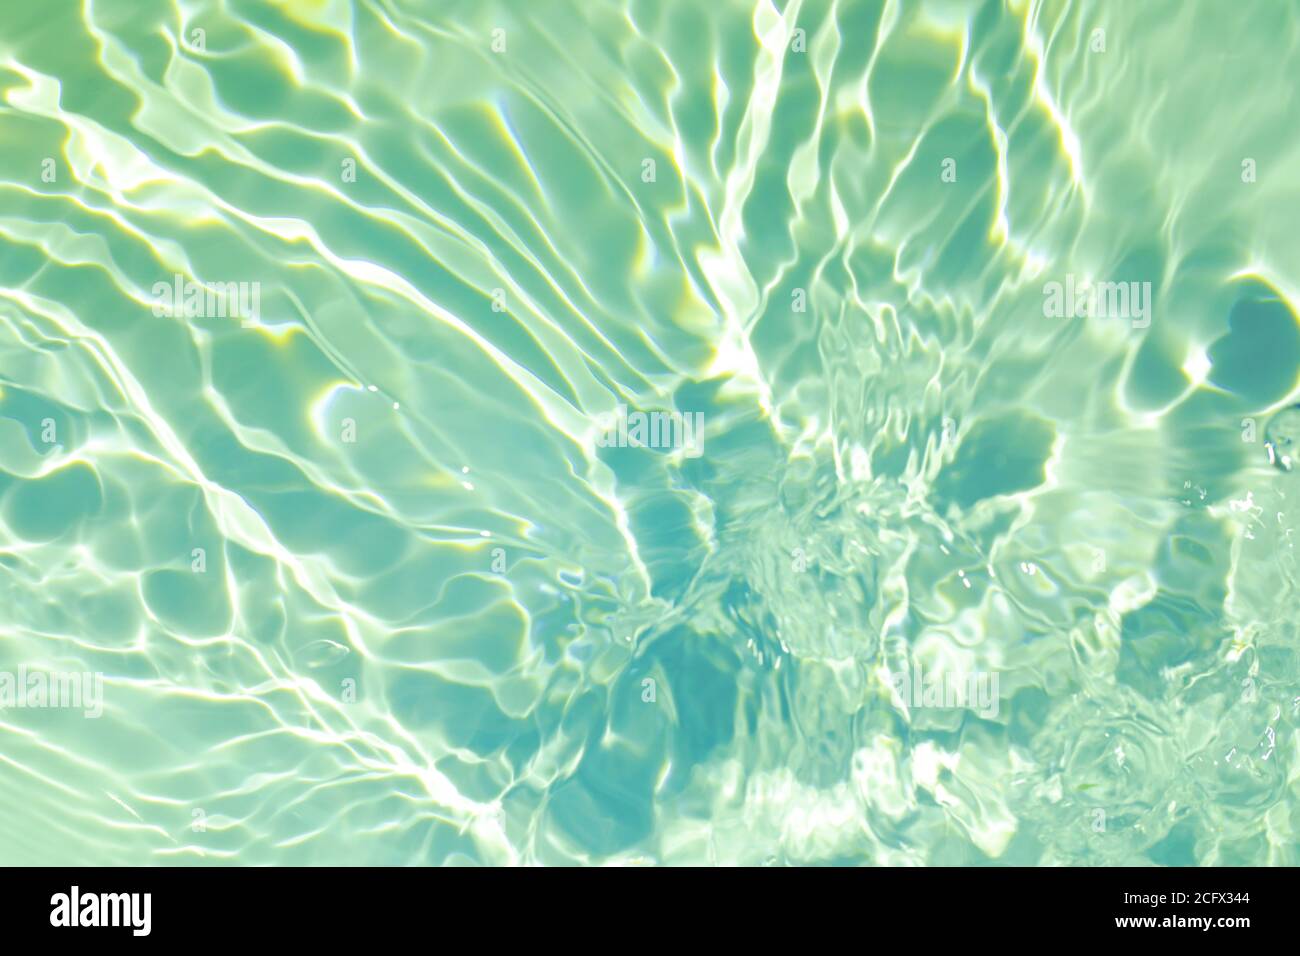 De-focused closeup of mint green transparent clear calm water surface  texture with splashes and bubbles. Trendy abstract summer nature  background. Mint colored waves in sunlight with copy space. Photos